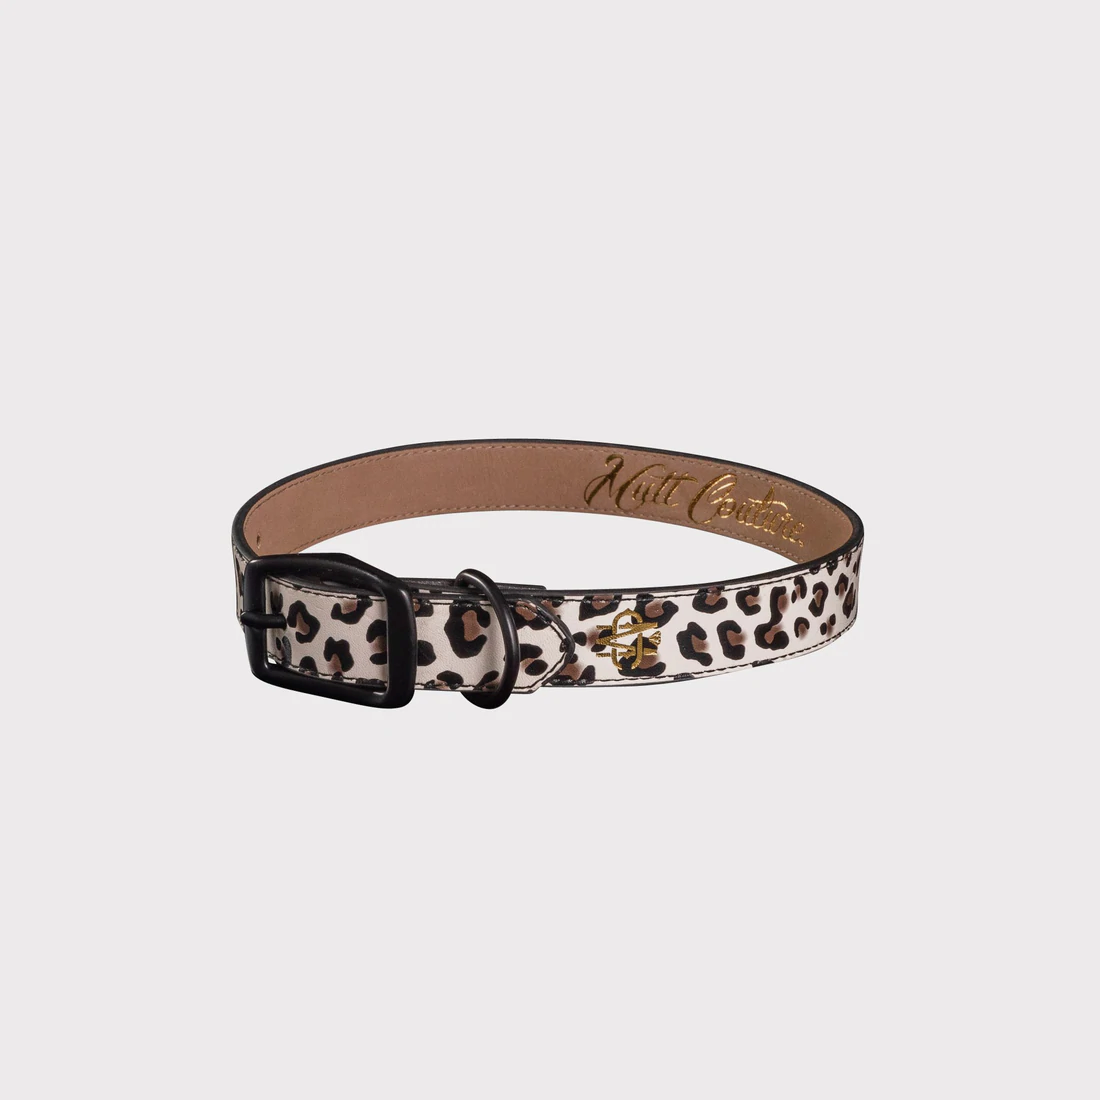 Mutt Couture Leopard Print Leather Dog Collar Width 1 Inch